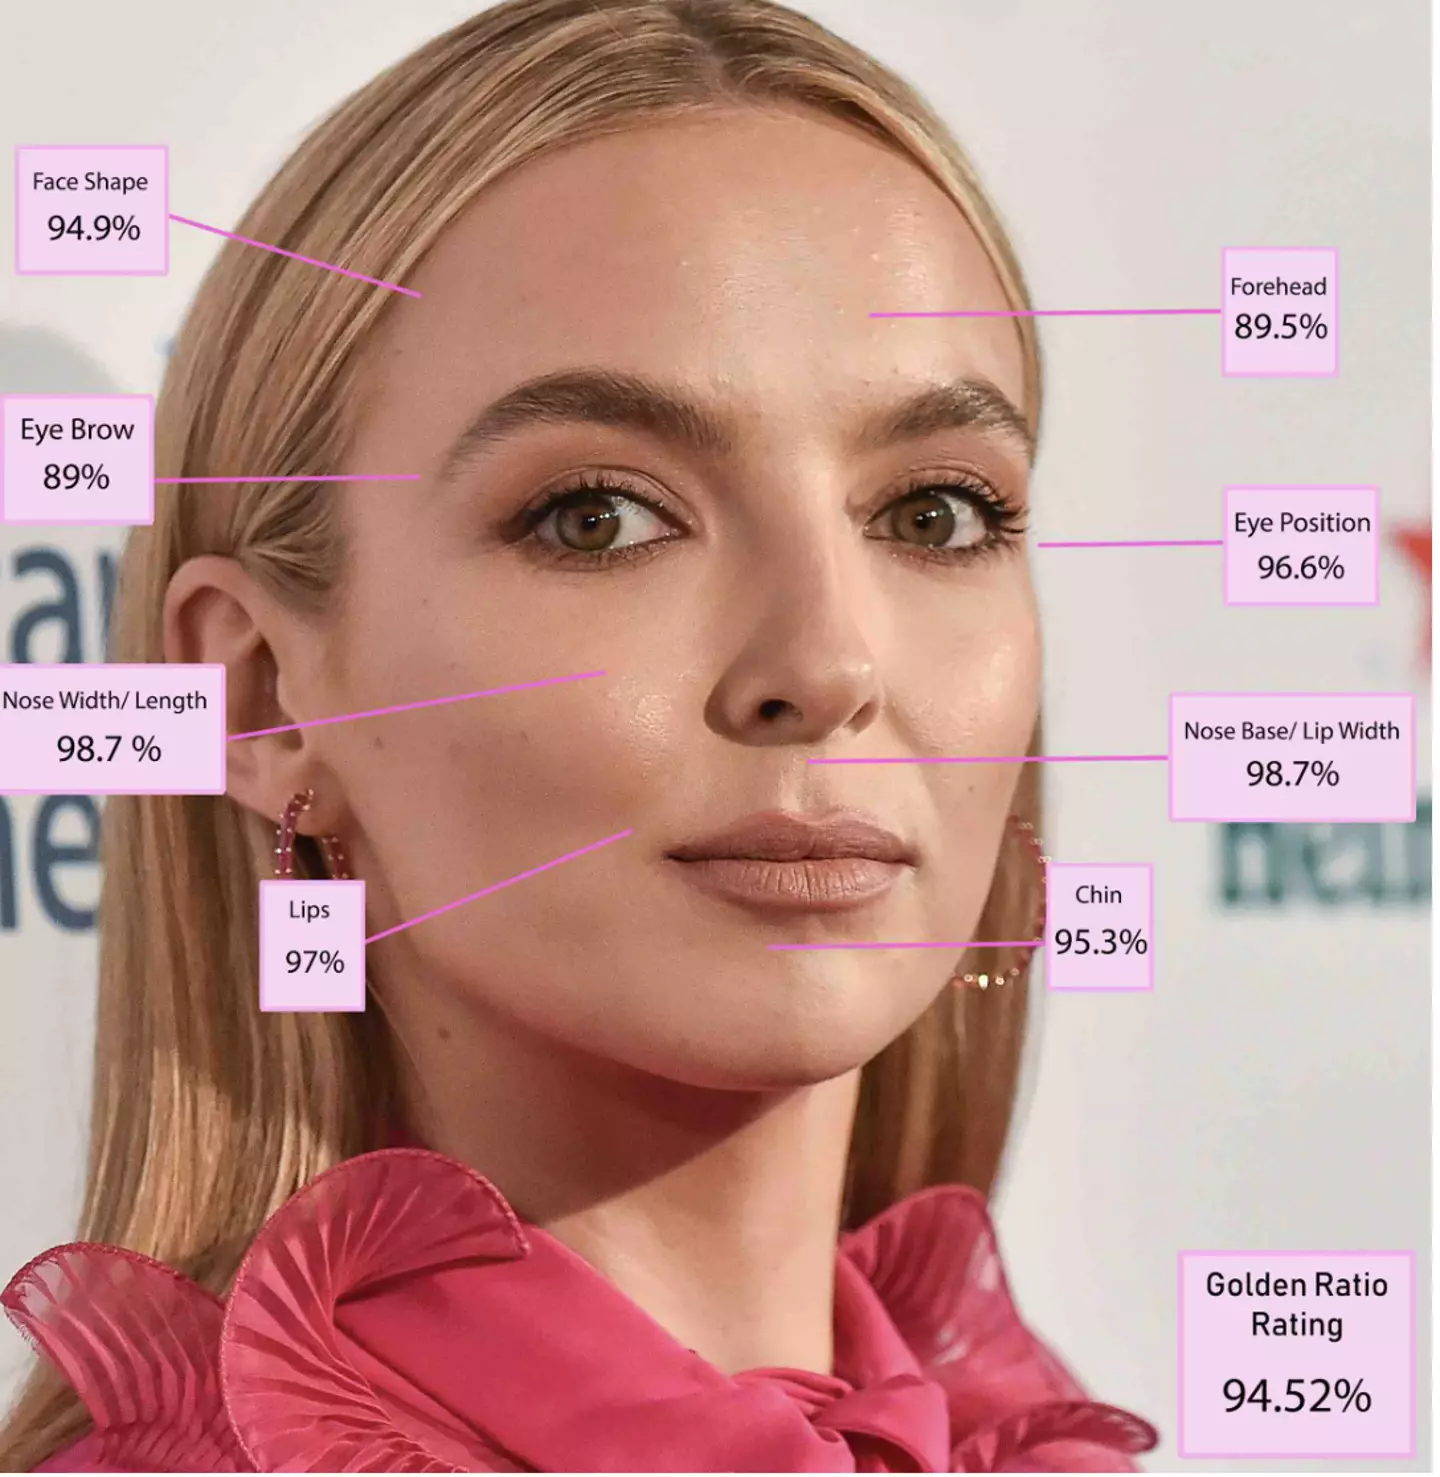 First place goes to Jodie Comer with a Greek Golden Ratio of 94.52 percent.